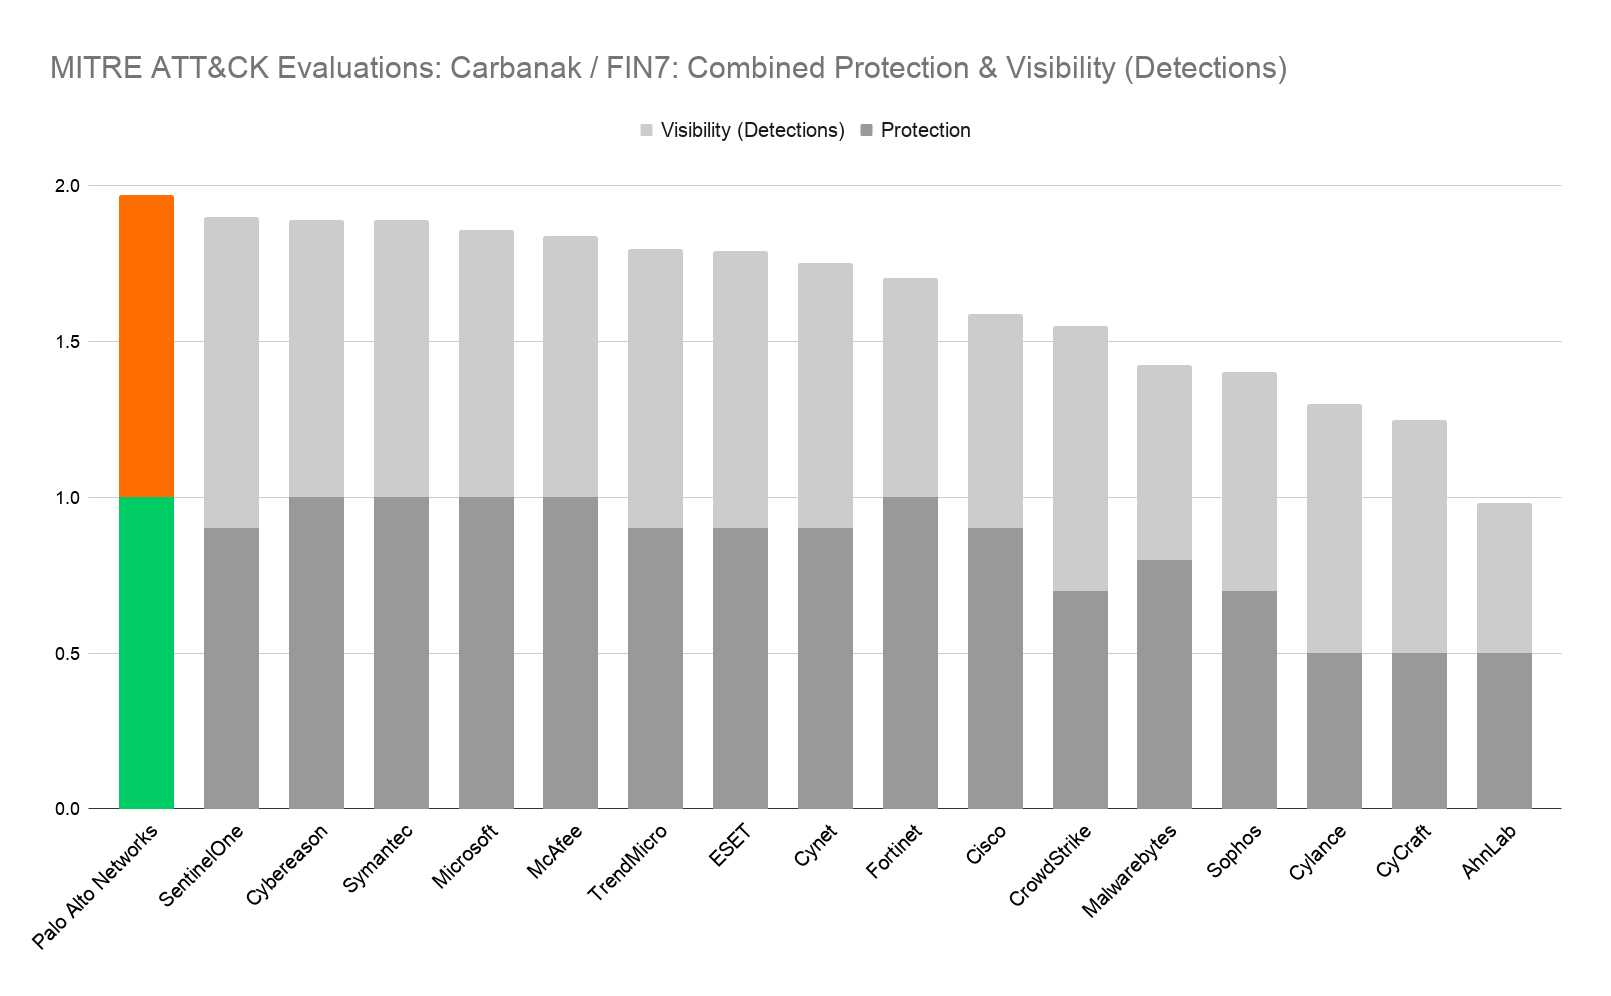 Figure 1. Cortex XDR had the highest combined protection and detection results in the evaluation. *Note: Data and charts based on MITRE results minus detections with a “Configuration Change” modifier.